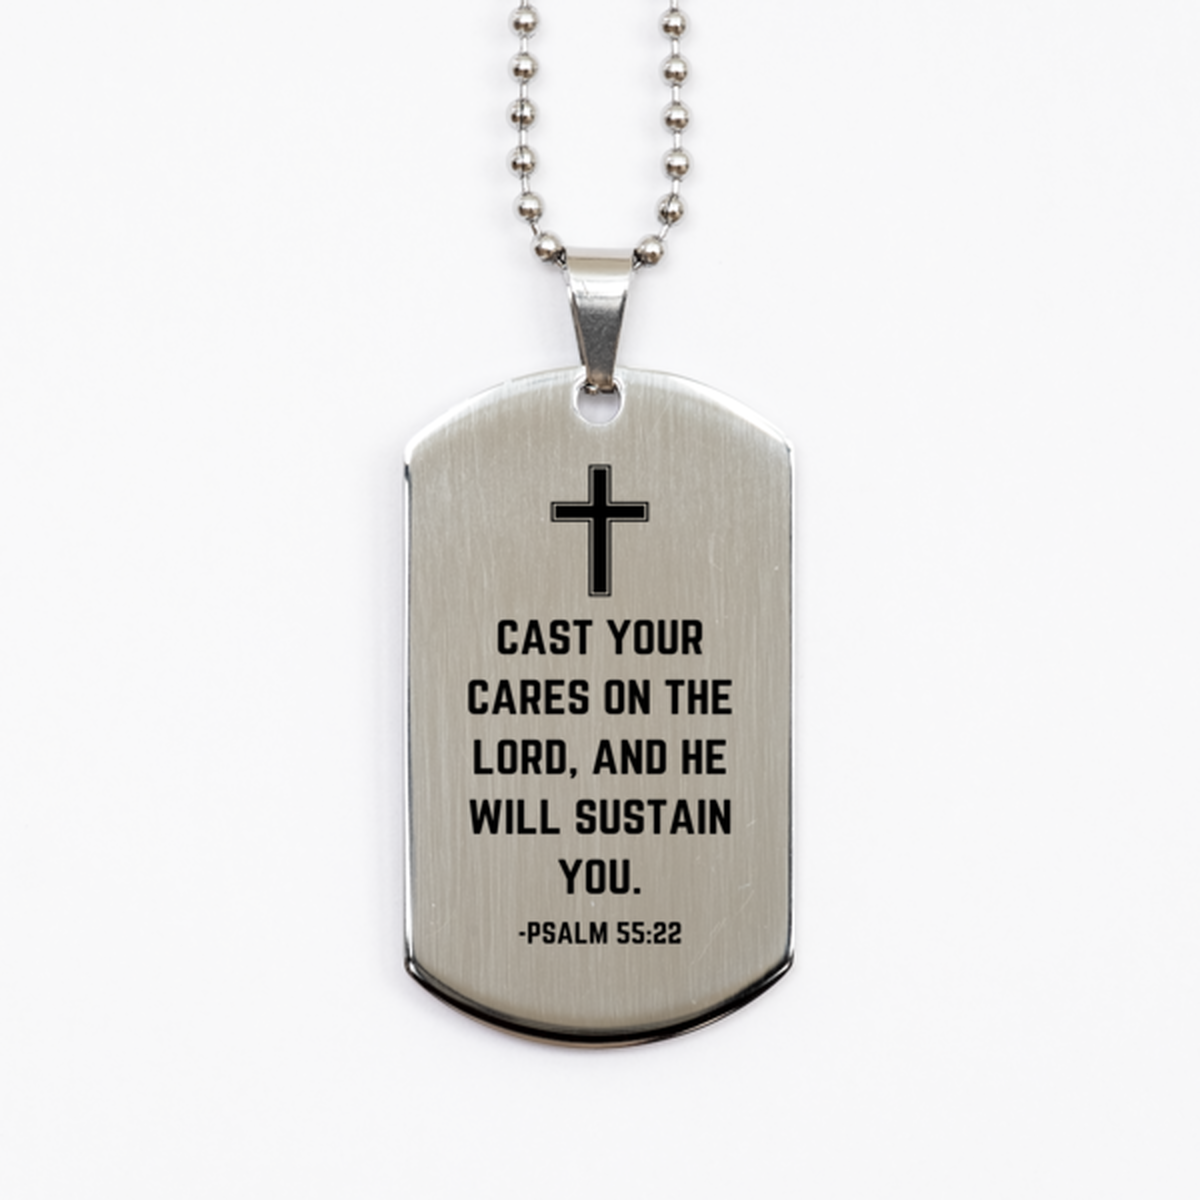 Baptism Gifts For Teenage Boys Girls, Christian Bible Verse Silver Dog Tag, Cast your cares on the Lord, Confirmation Gifts, Bible Verse Necklace for Son, Godson, Grandson, Nephew